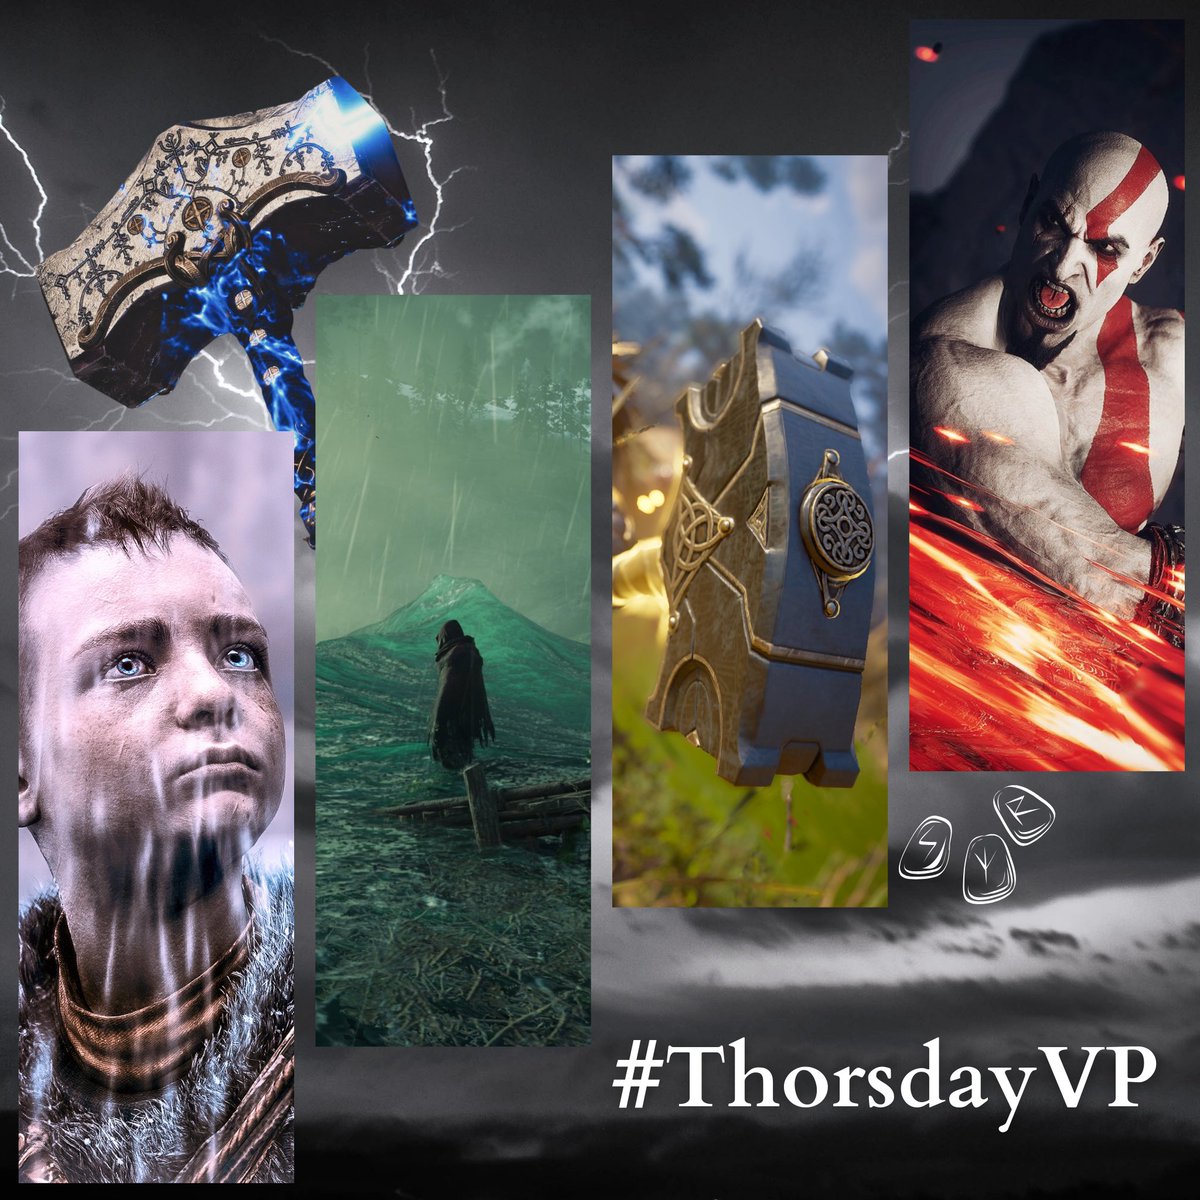 Tomorrow is #ThorsdayVP again! We've seen so many incredible shots already, thank you all!! Looking forward to more 🔥 Use the tag above to show us your Norse inspired VP on Thursdays ⚡